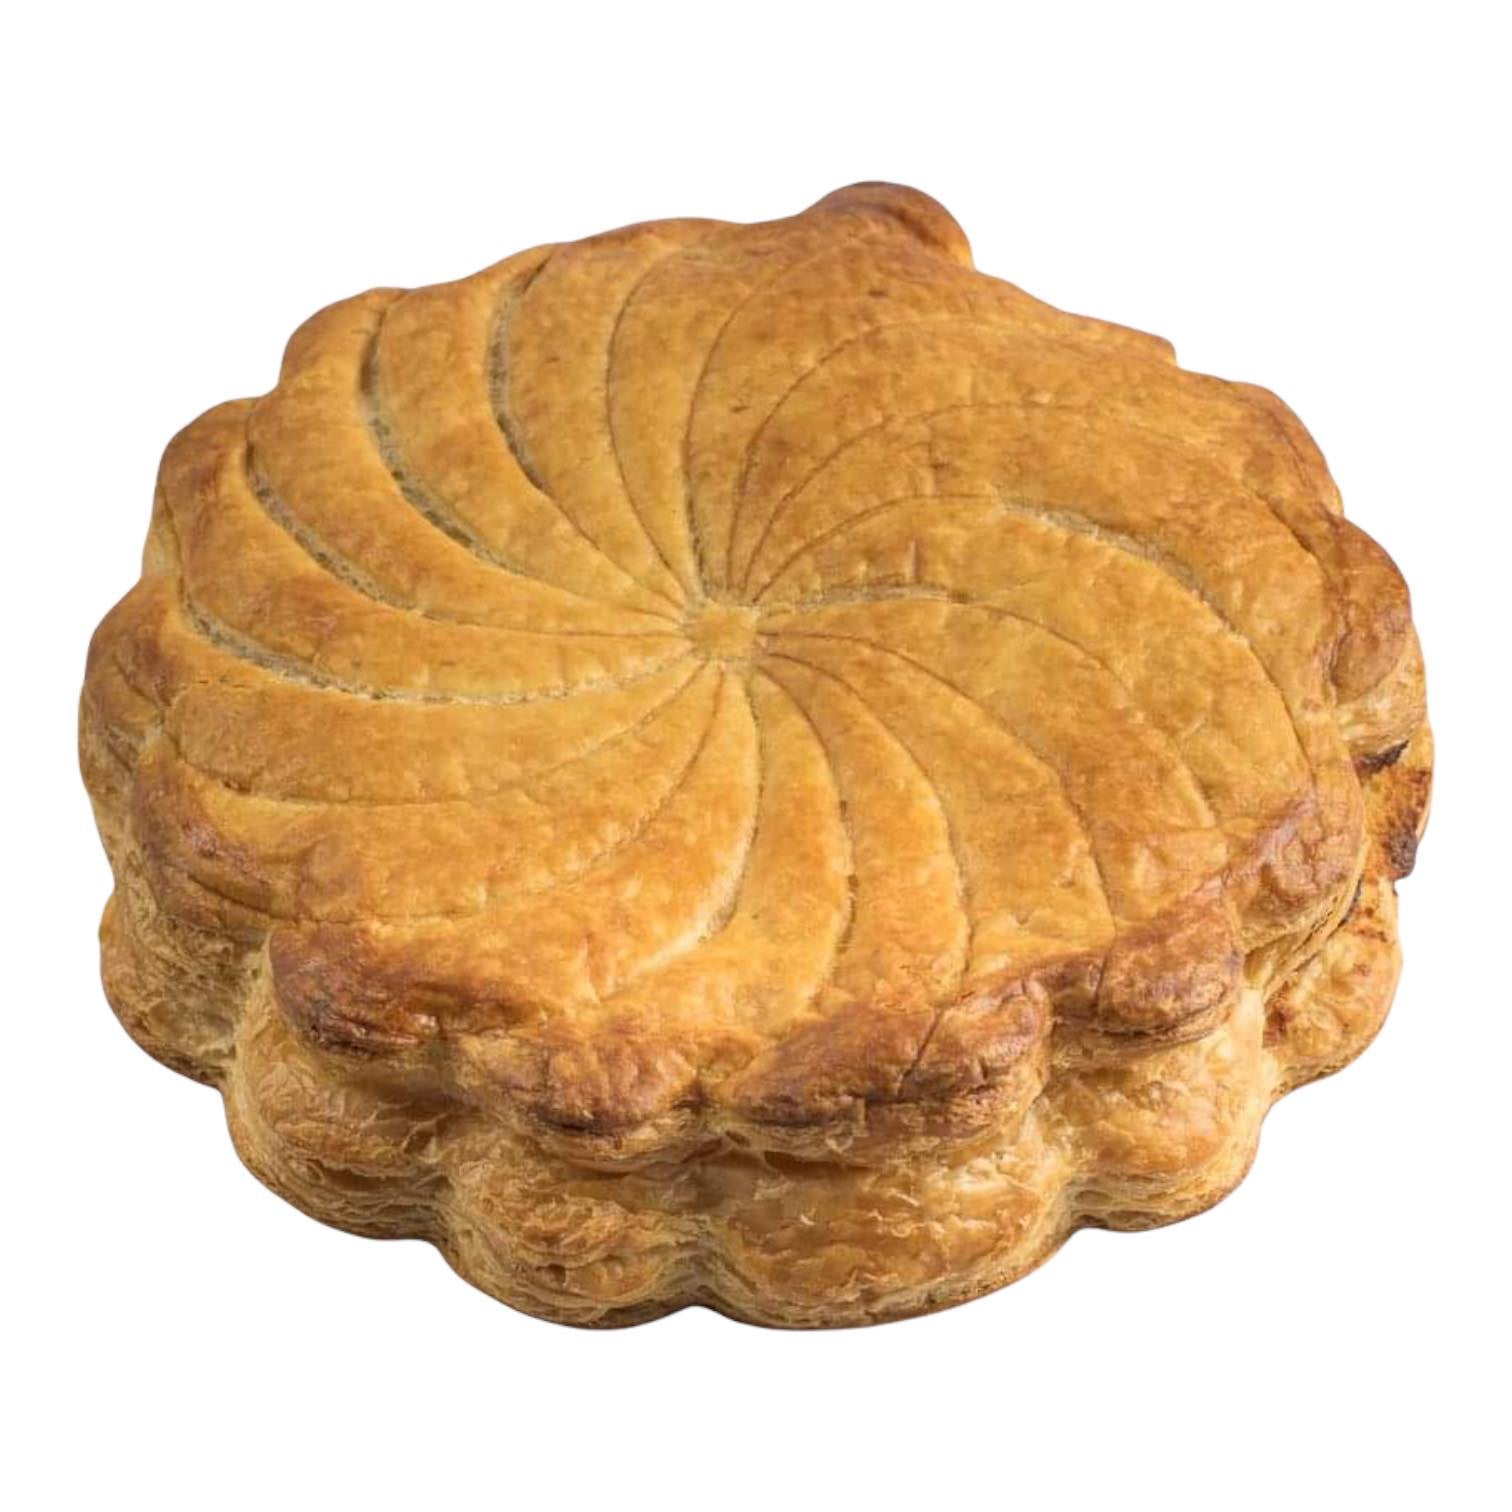 Pithiviers made with Blitz Puff Pastry - Pastries Like a Pro